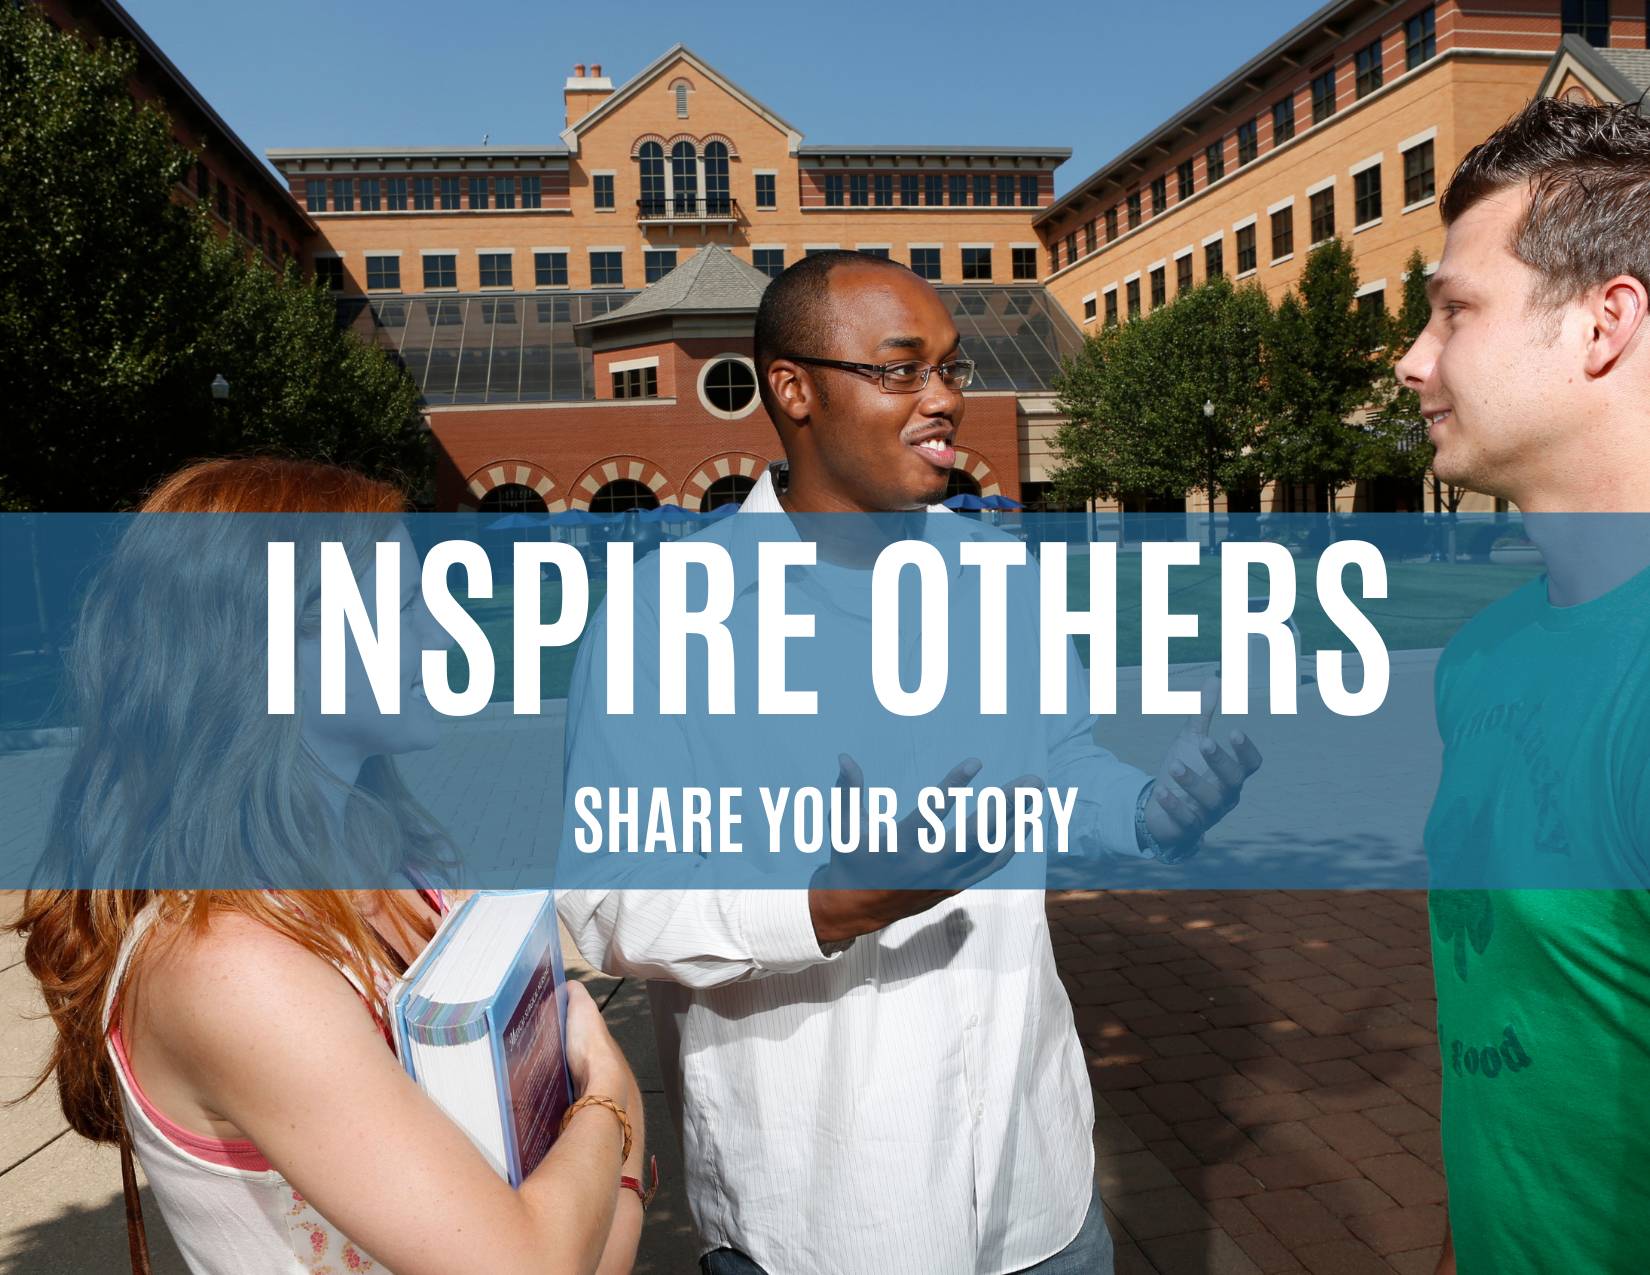 Inspire others, share your story